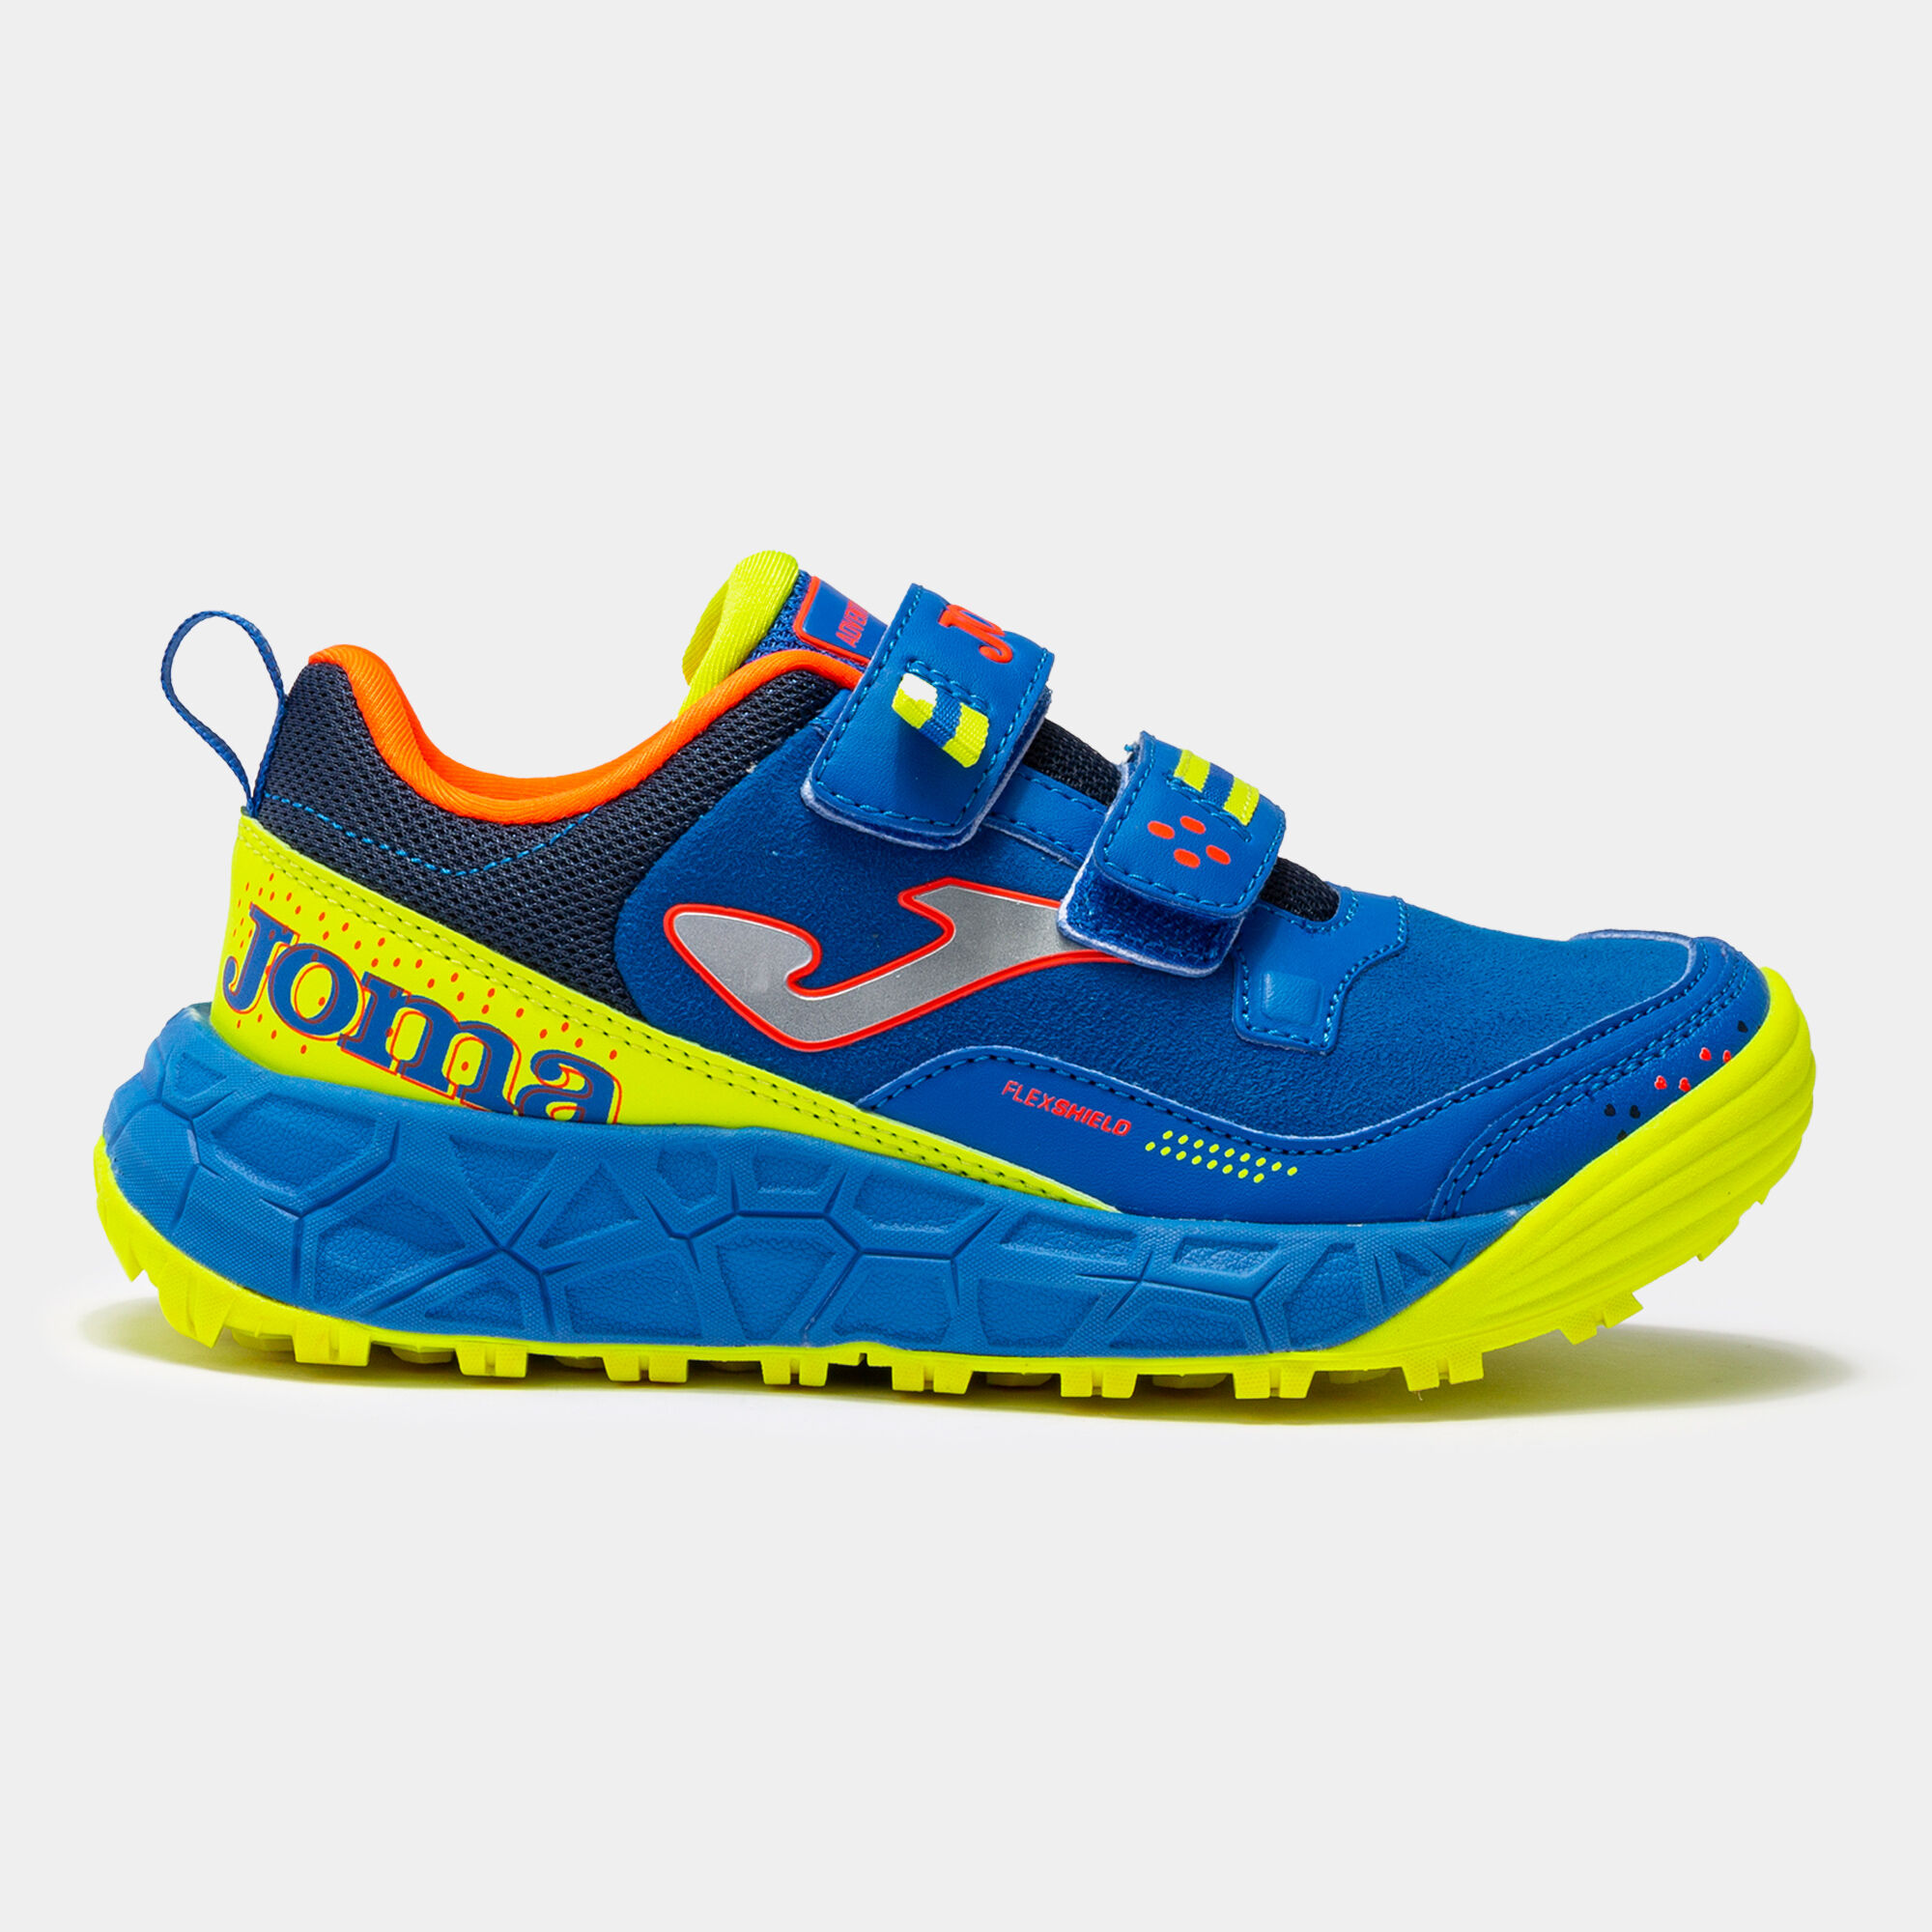 TRAIL-RUNNING SHOES ADVENTURE 22 JUNIOR ROYAL BLUE FLUORESCENT YELLOW